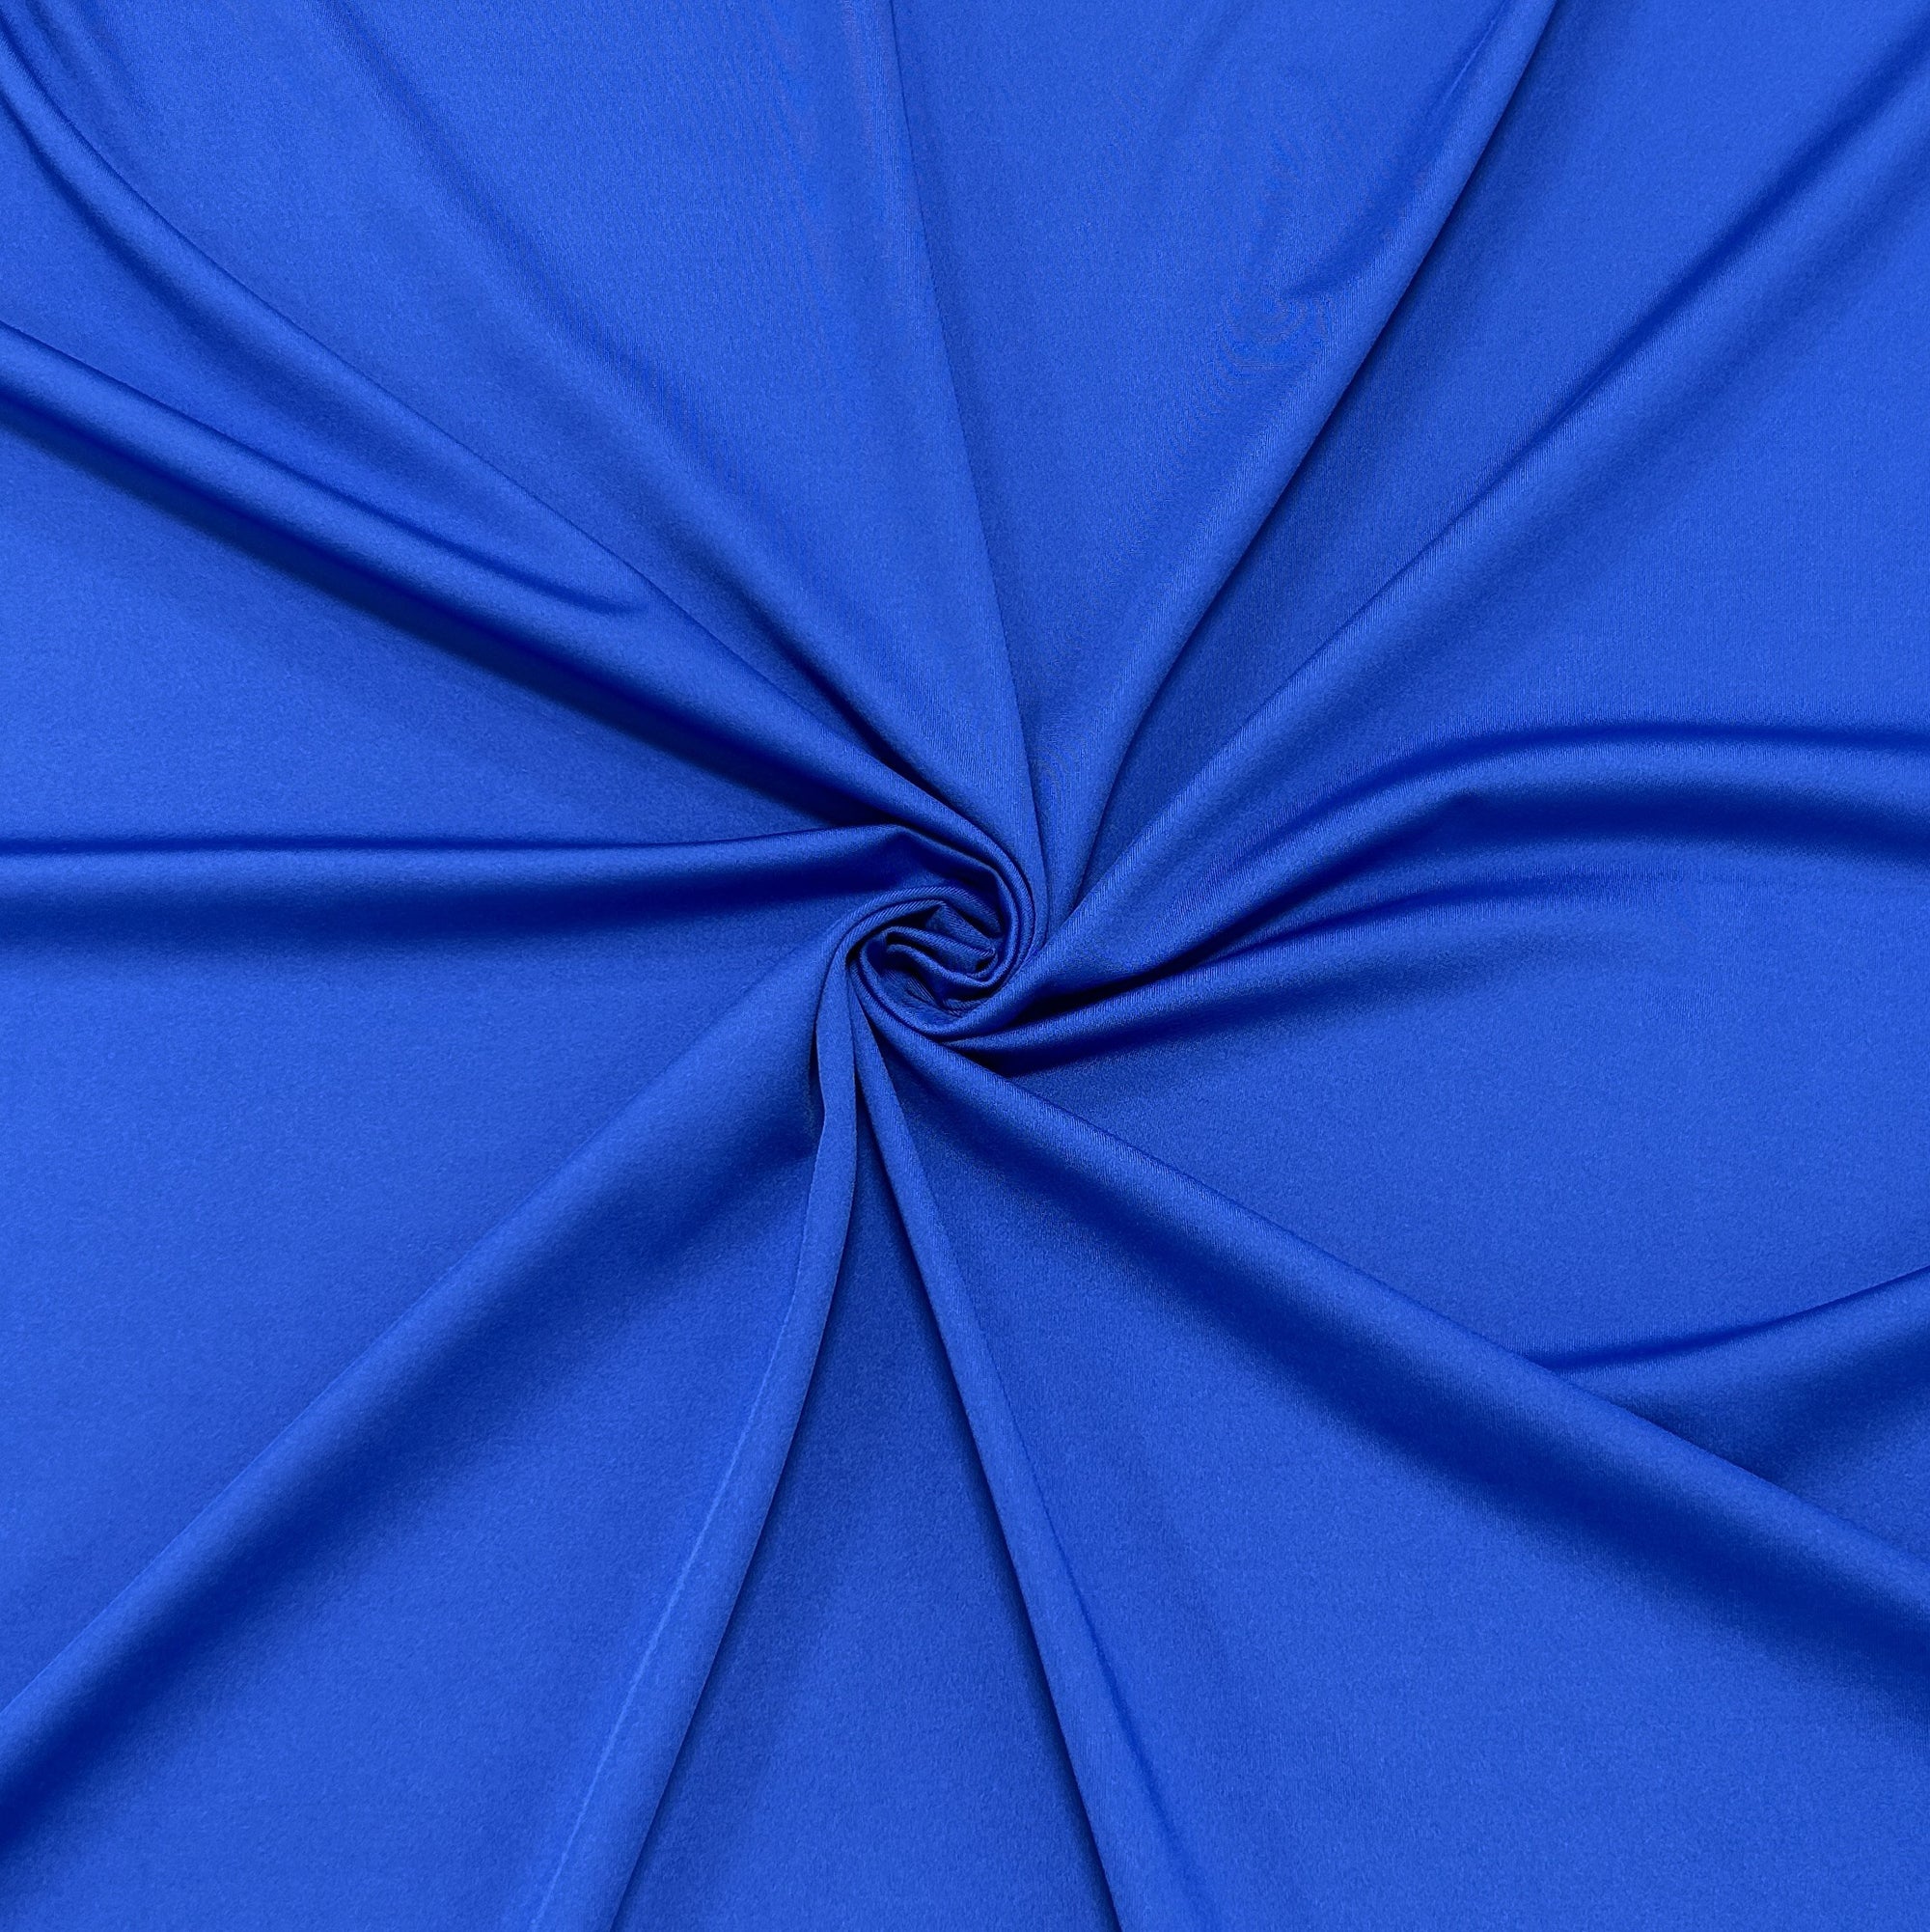 Solid Royal Blue 4 Way Stretch Moisture Wicking Athletic Performance Knit Fabric